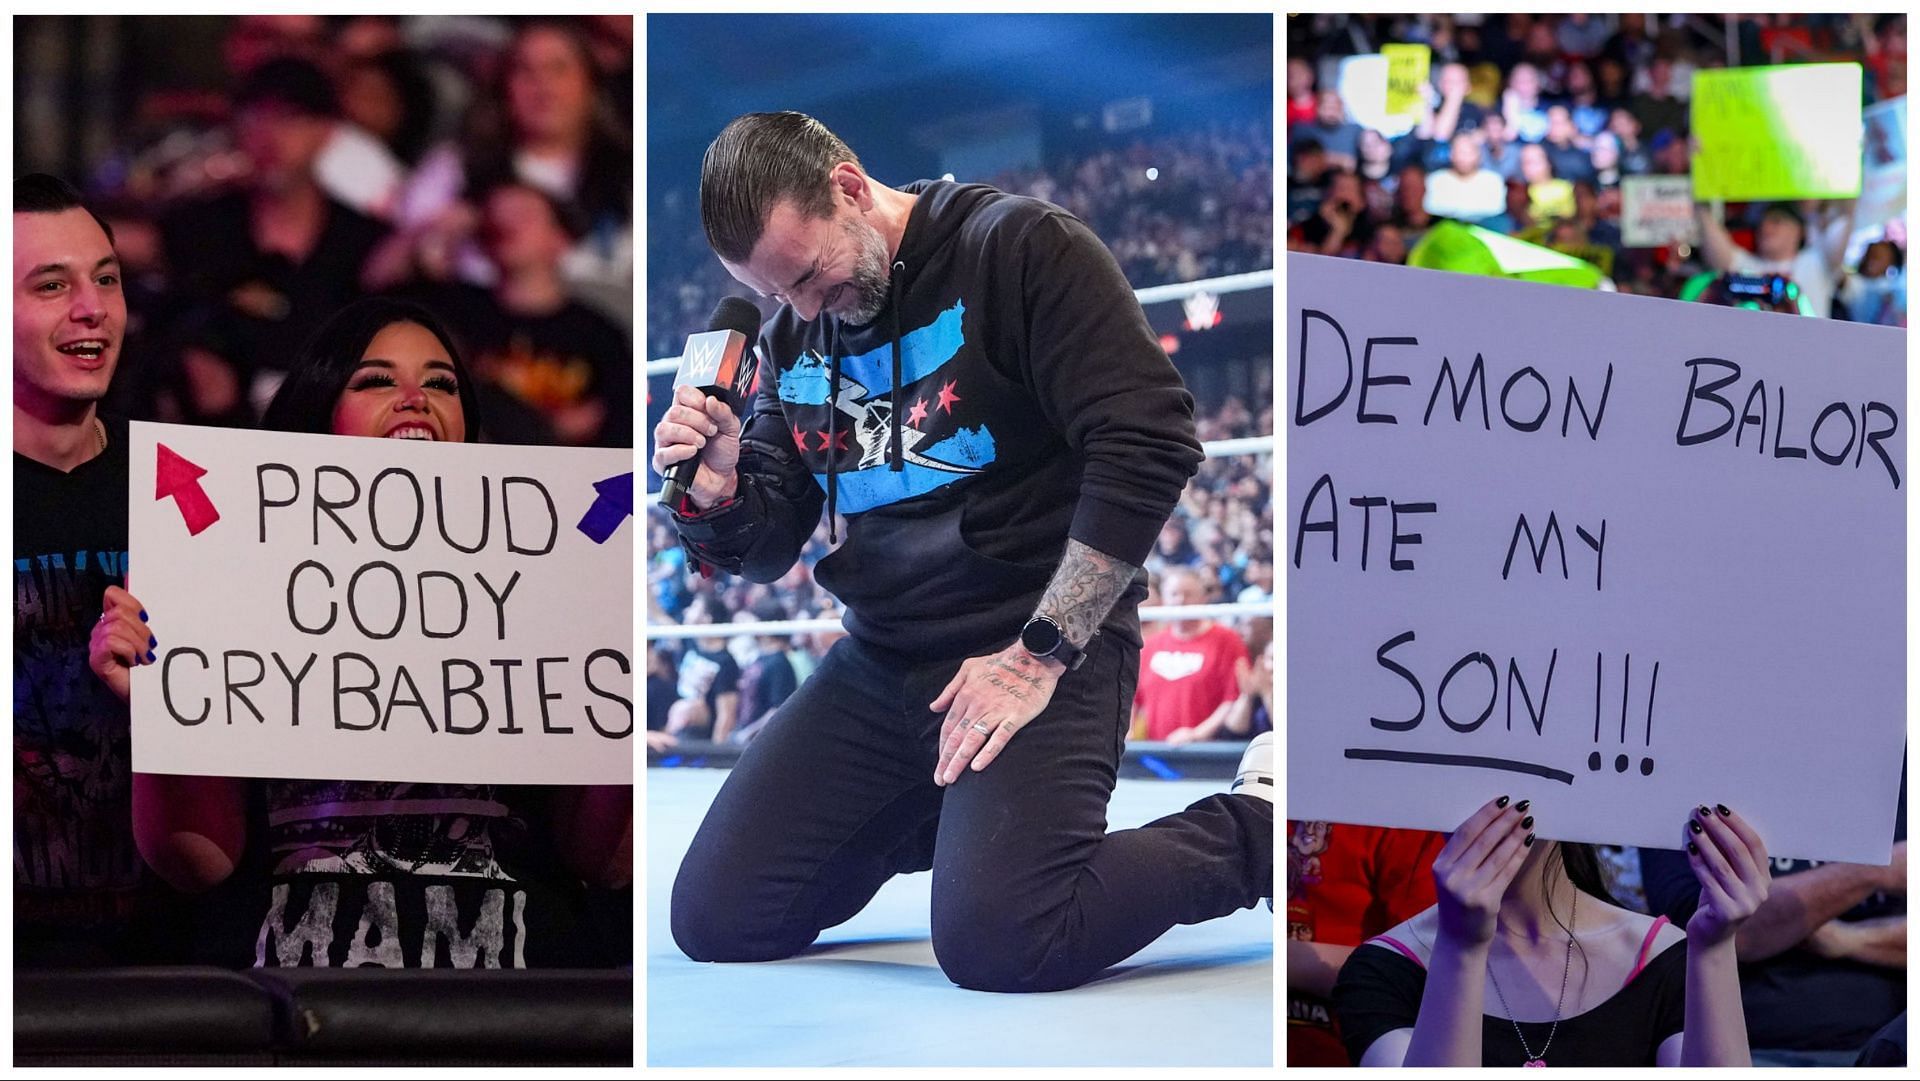 WWE fans in the crowd at RAW, CM Punk in the ring at RAW